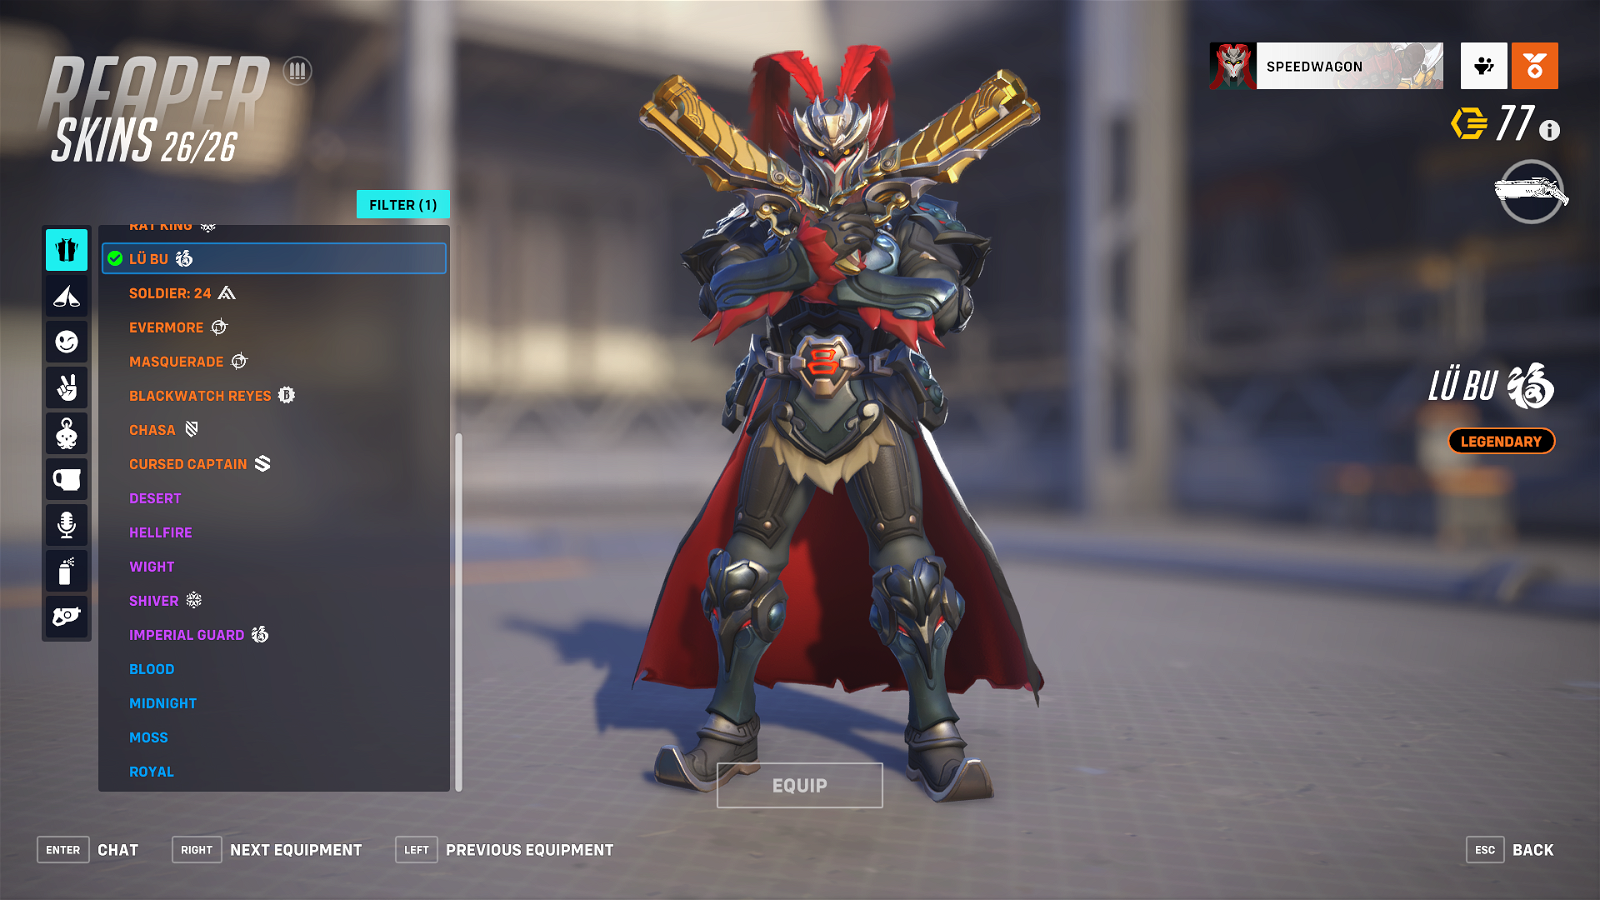 How To Claim Free Skins In Overwatch 2 - Cursed Reaper Skin and More